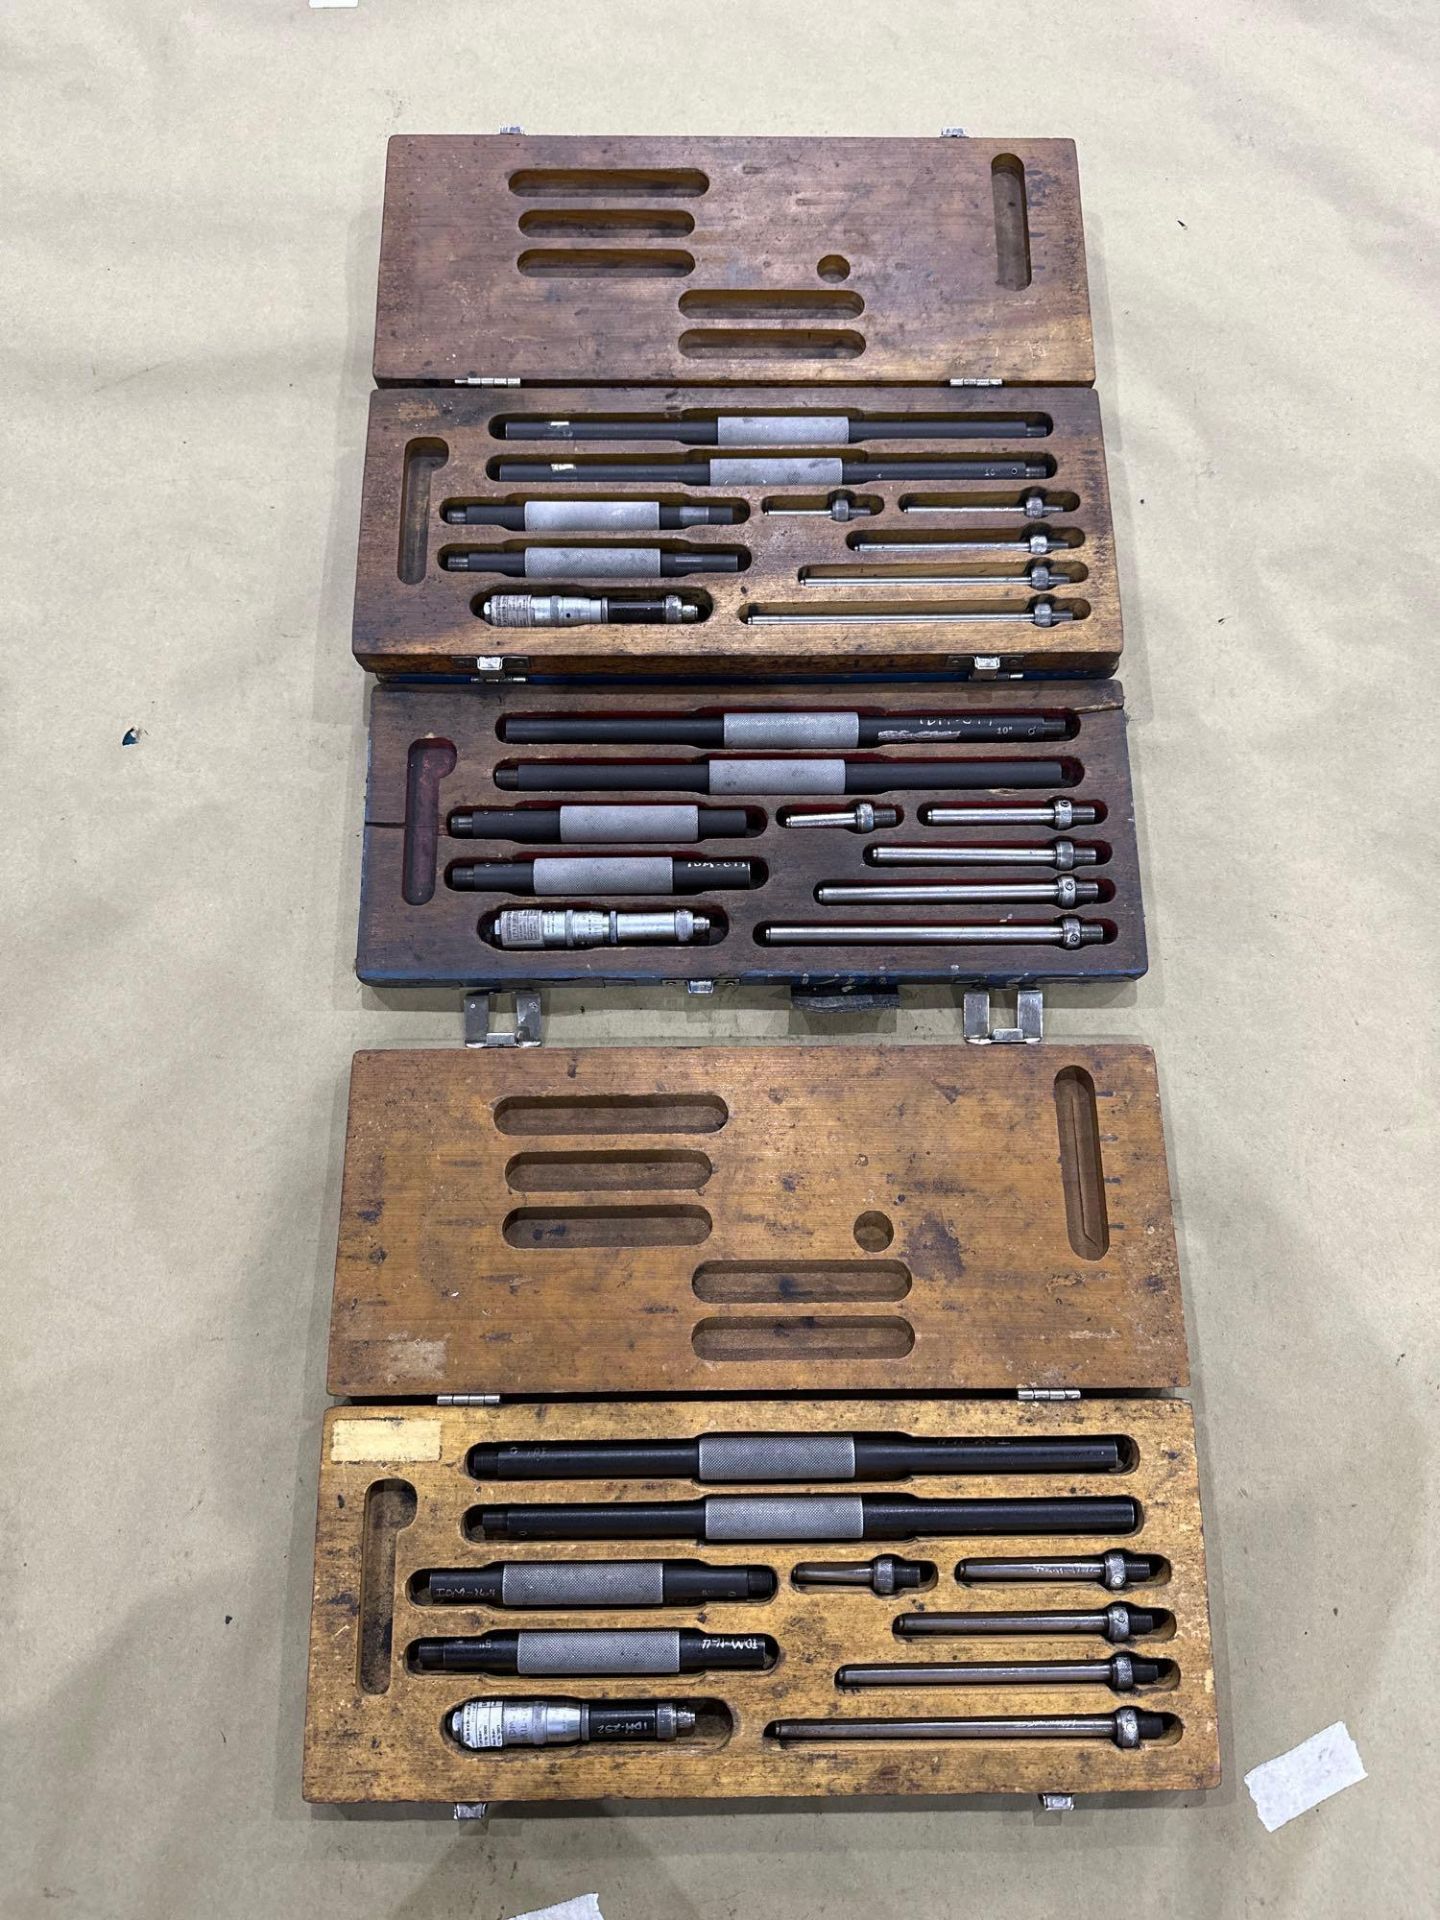 Lot of 3 Scherr-Tumico Inside Tube Micrometer Sets in wood case. See Photo.